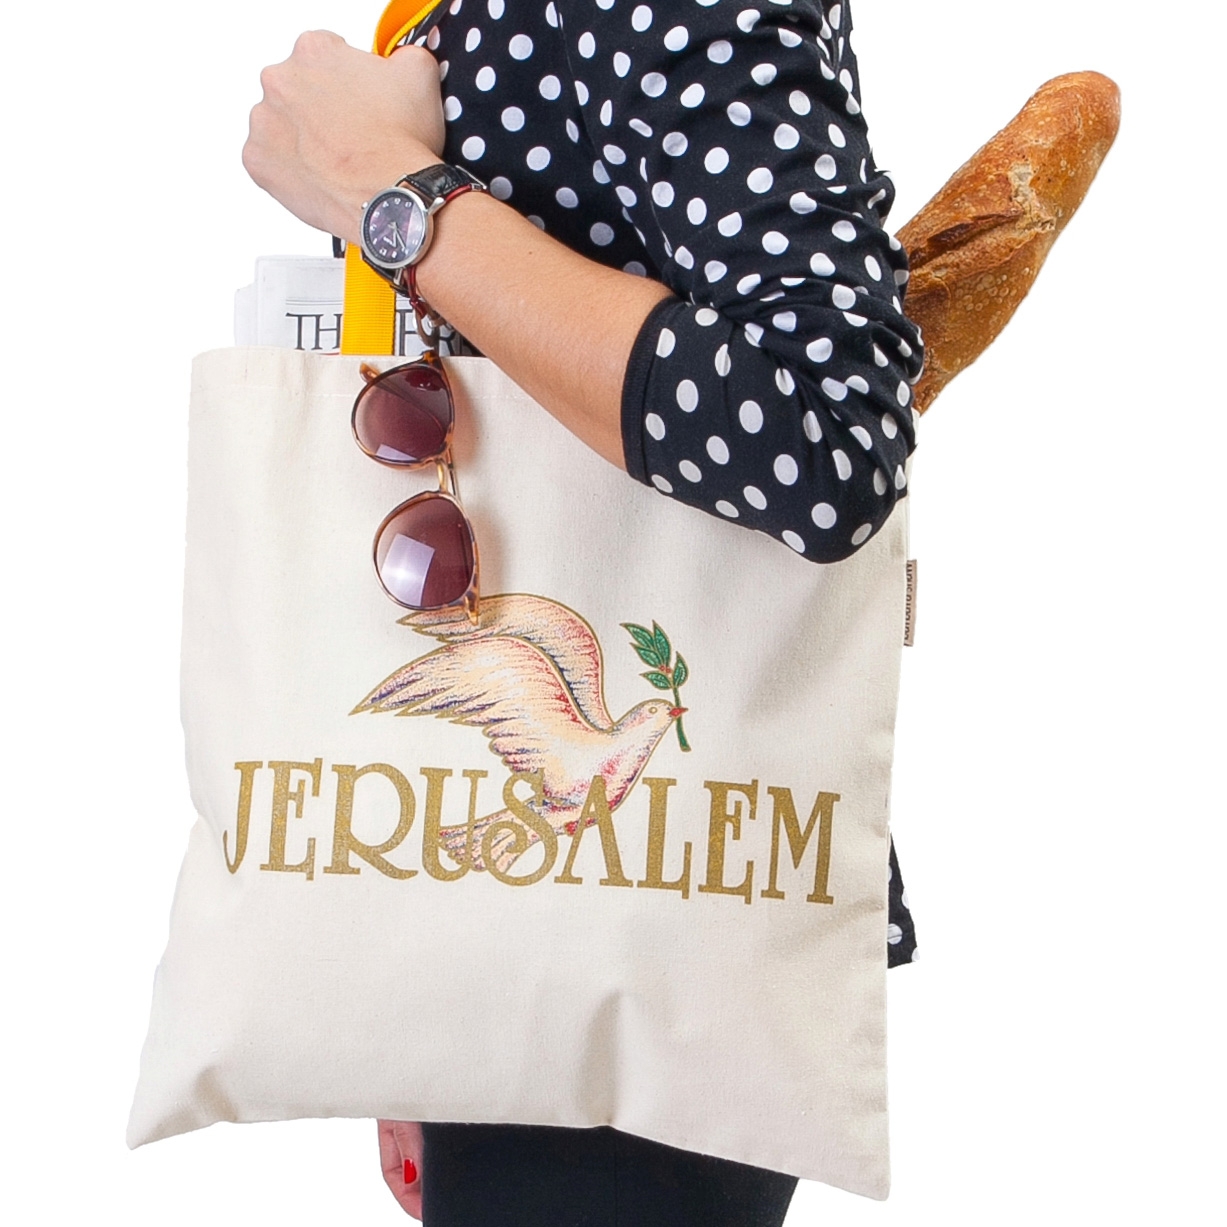 Barbara Shaw Tote Bag - Jerusalem with Dove and Olive Branch - 2